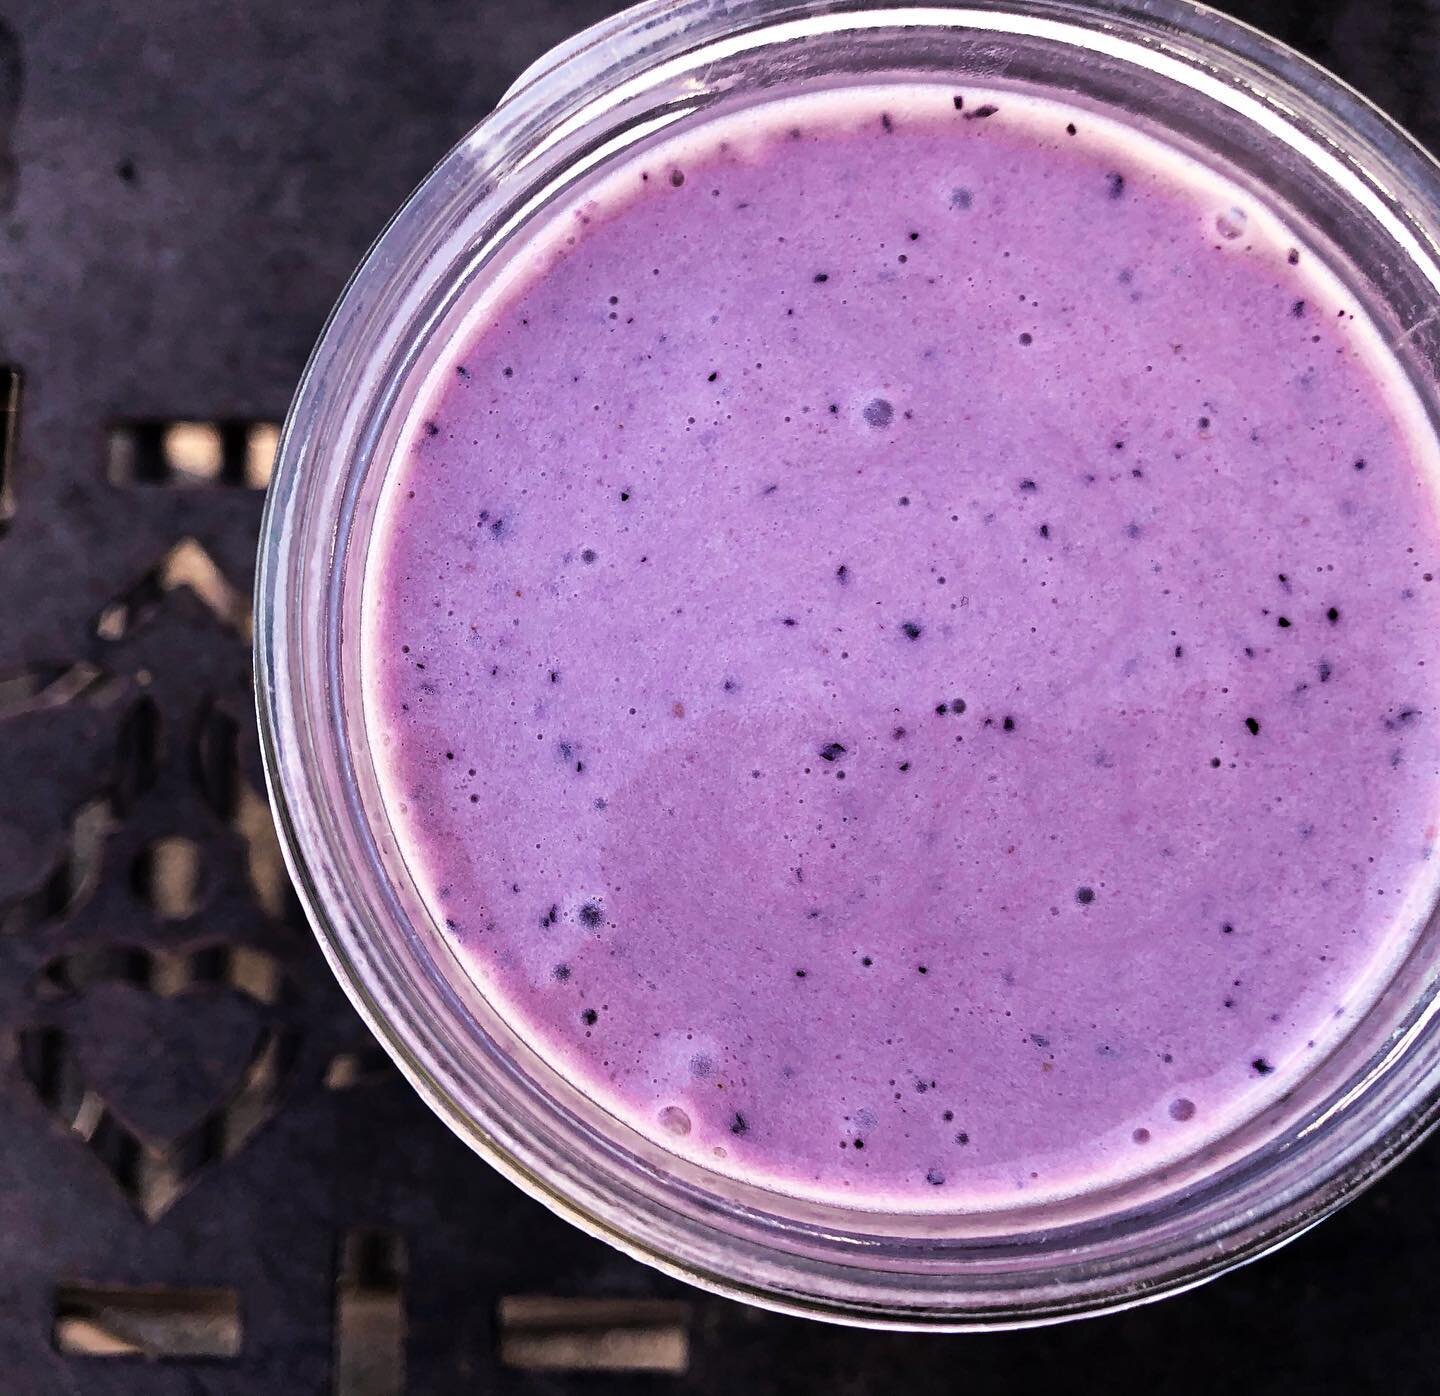 Frosty Blueberry Smoothie❄️
.
1 banana cut-up
1 1/2 cups pea protein milk
1/2 cup frozen blueberries
1/4 cup frozen mango
Handful of chopped spinach
Splash of OJ
1 tsp chia seeds
.
I mix the banana and milk first to create that smooth base. Then add 